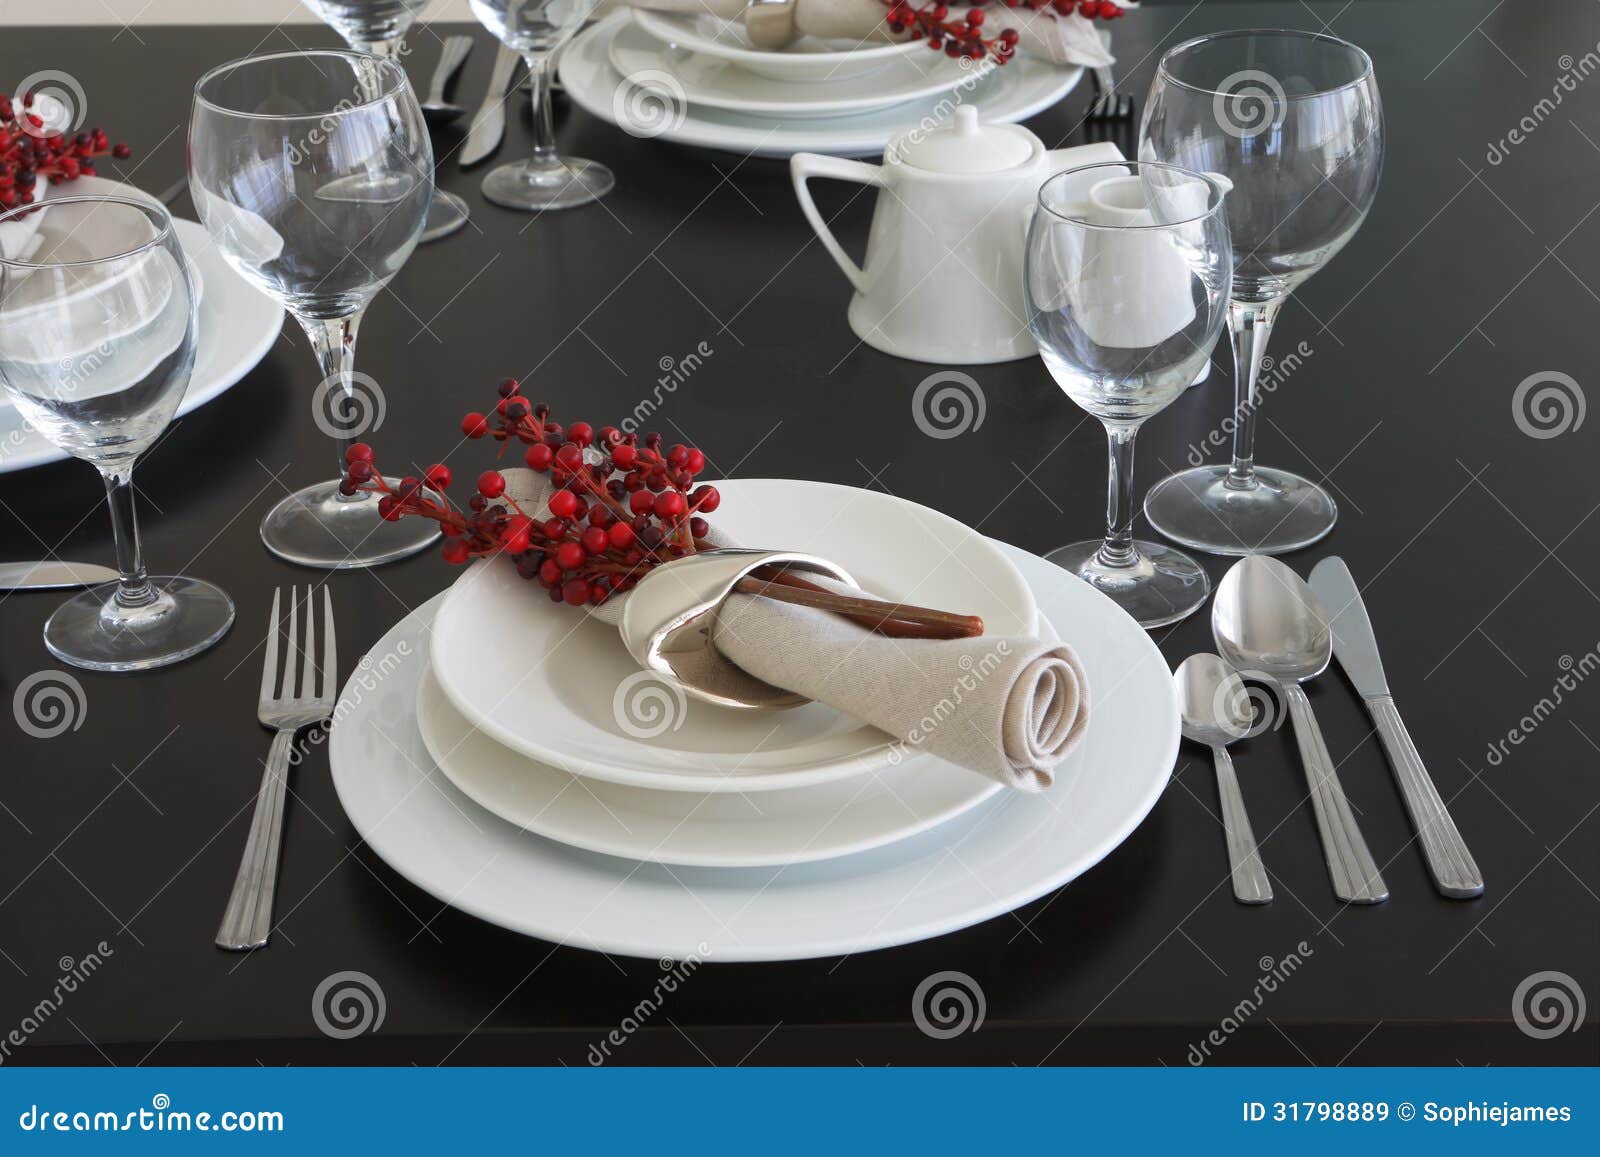 The Table is Styled and Beautifully Set for Dinner Stock Image - Image ...